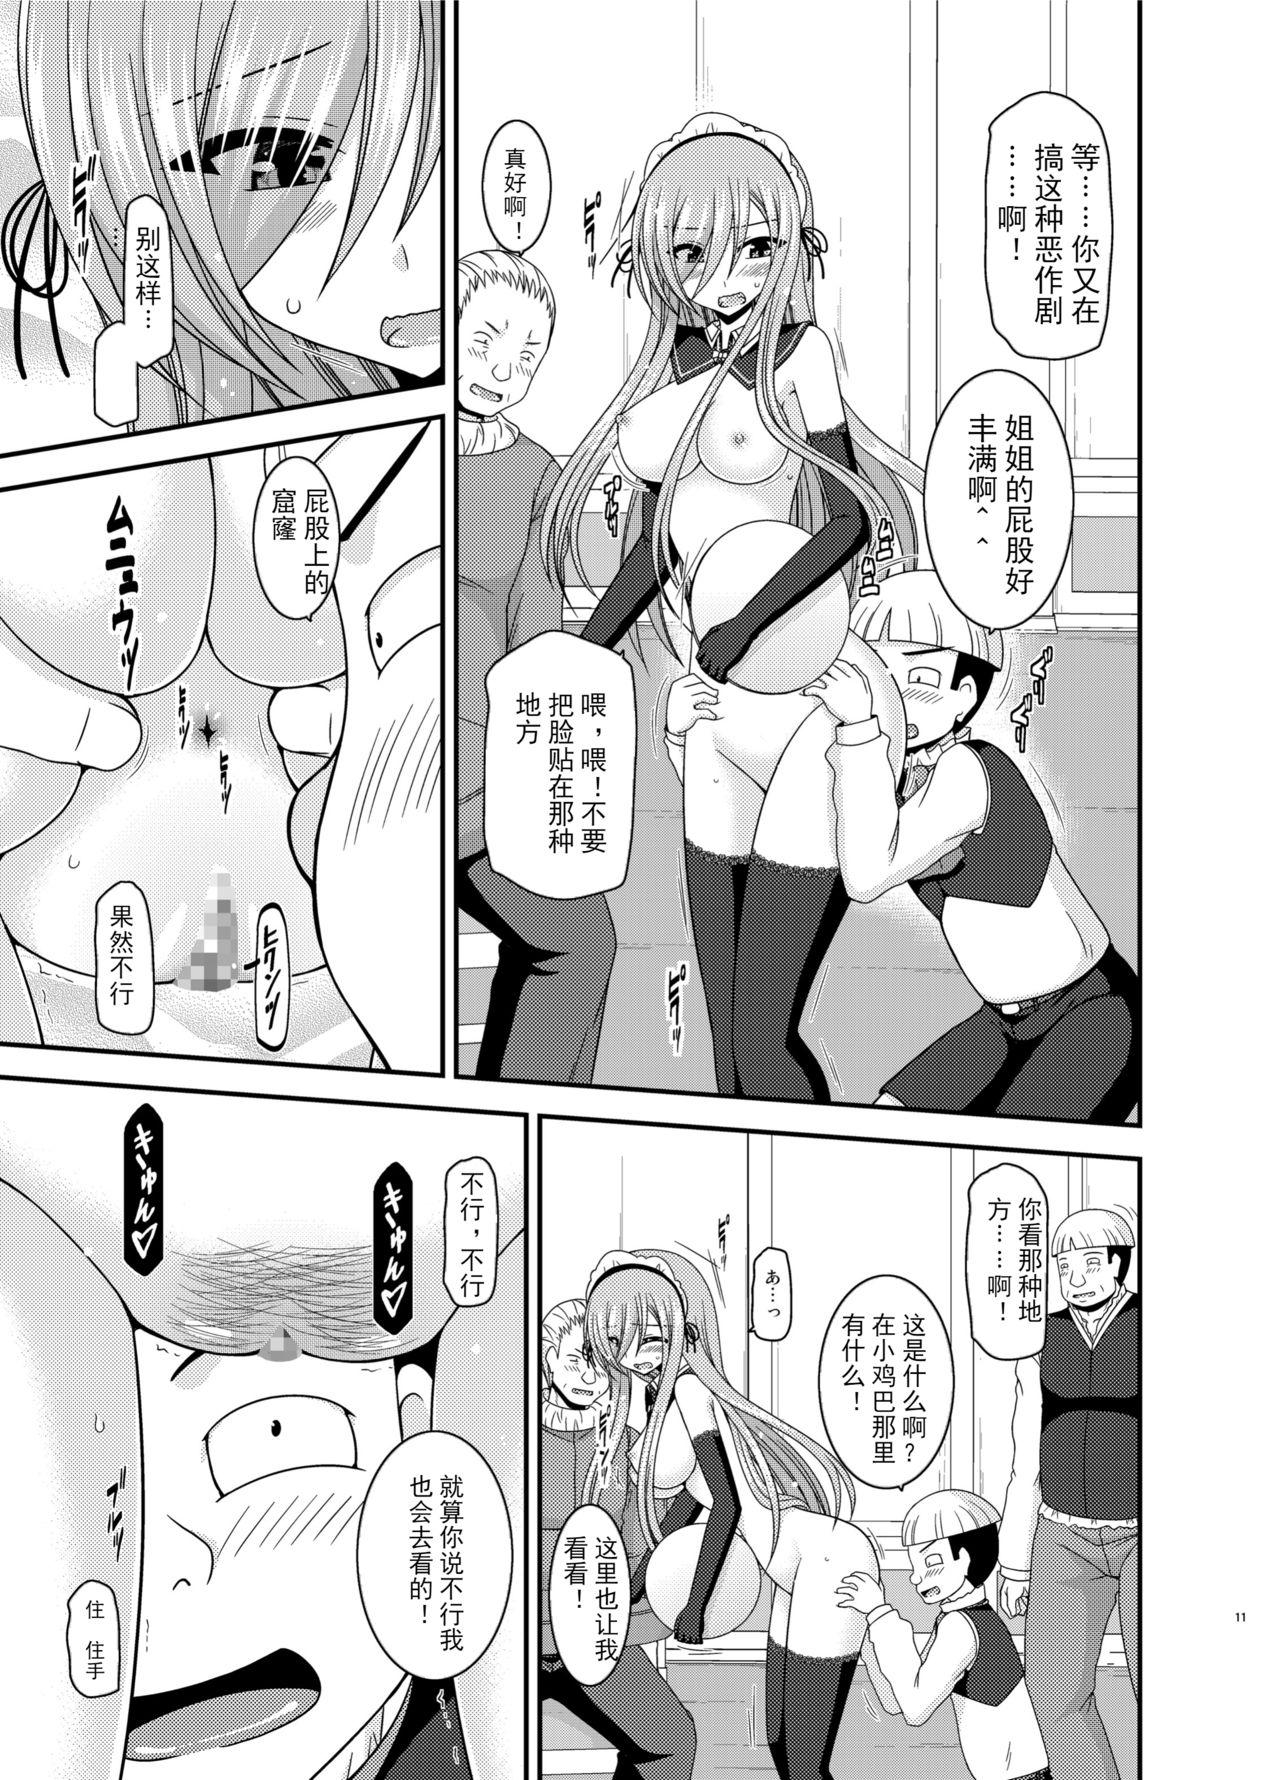 Staxxx Melon ga Chou Shindou! R14 - Tales of the abyss Lover - Page 11